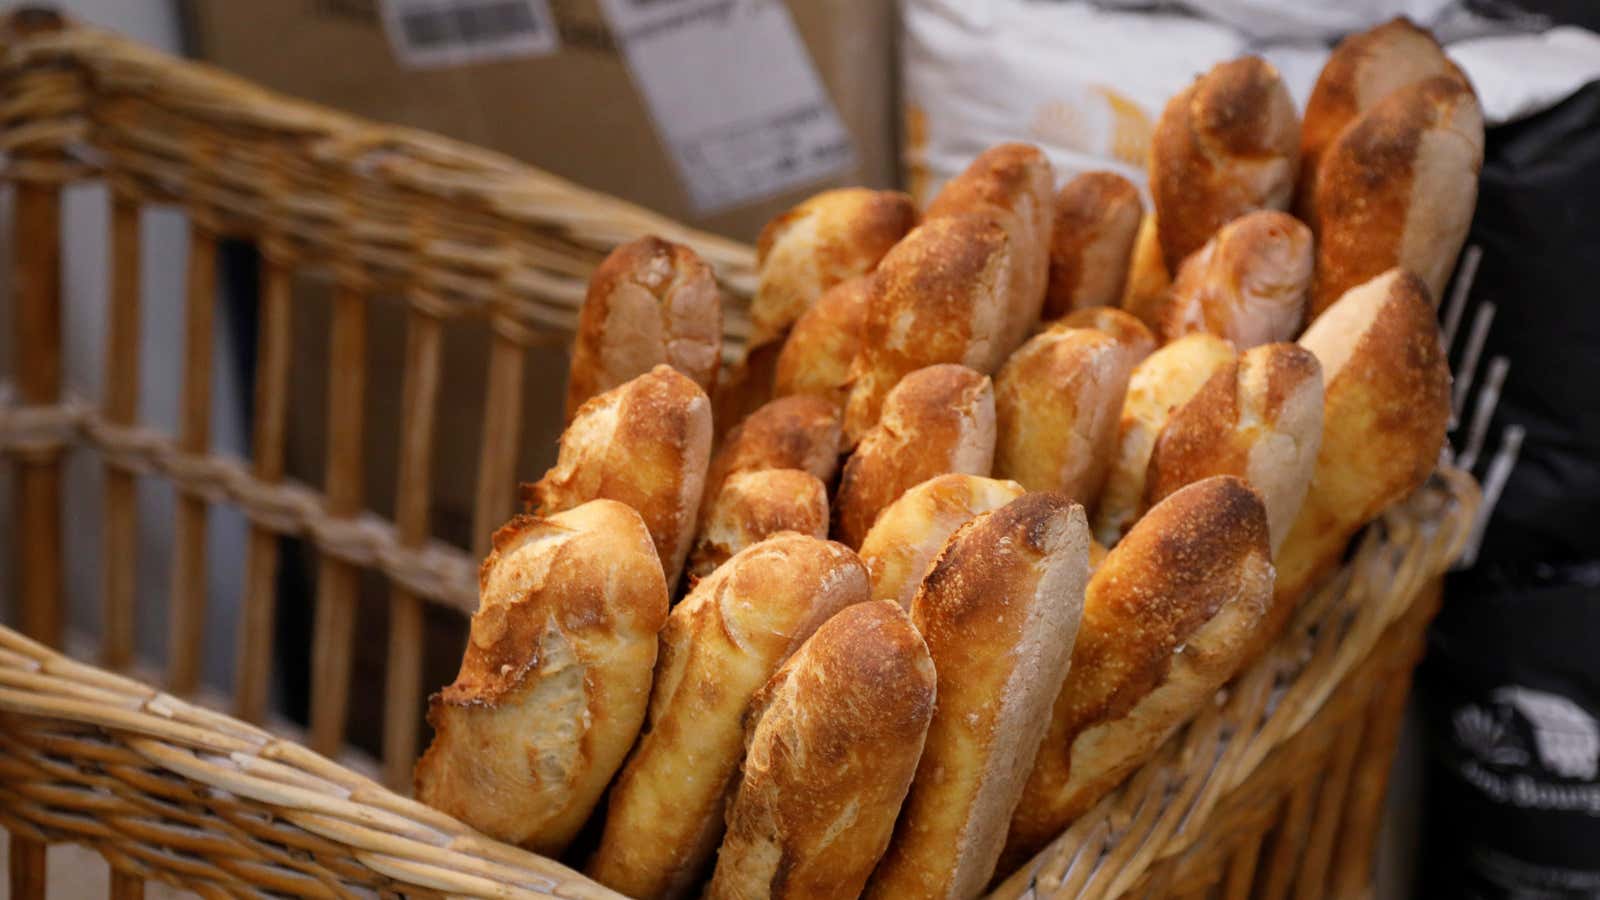 Baguette prices are on the rise.